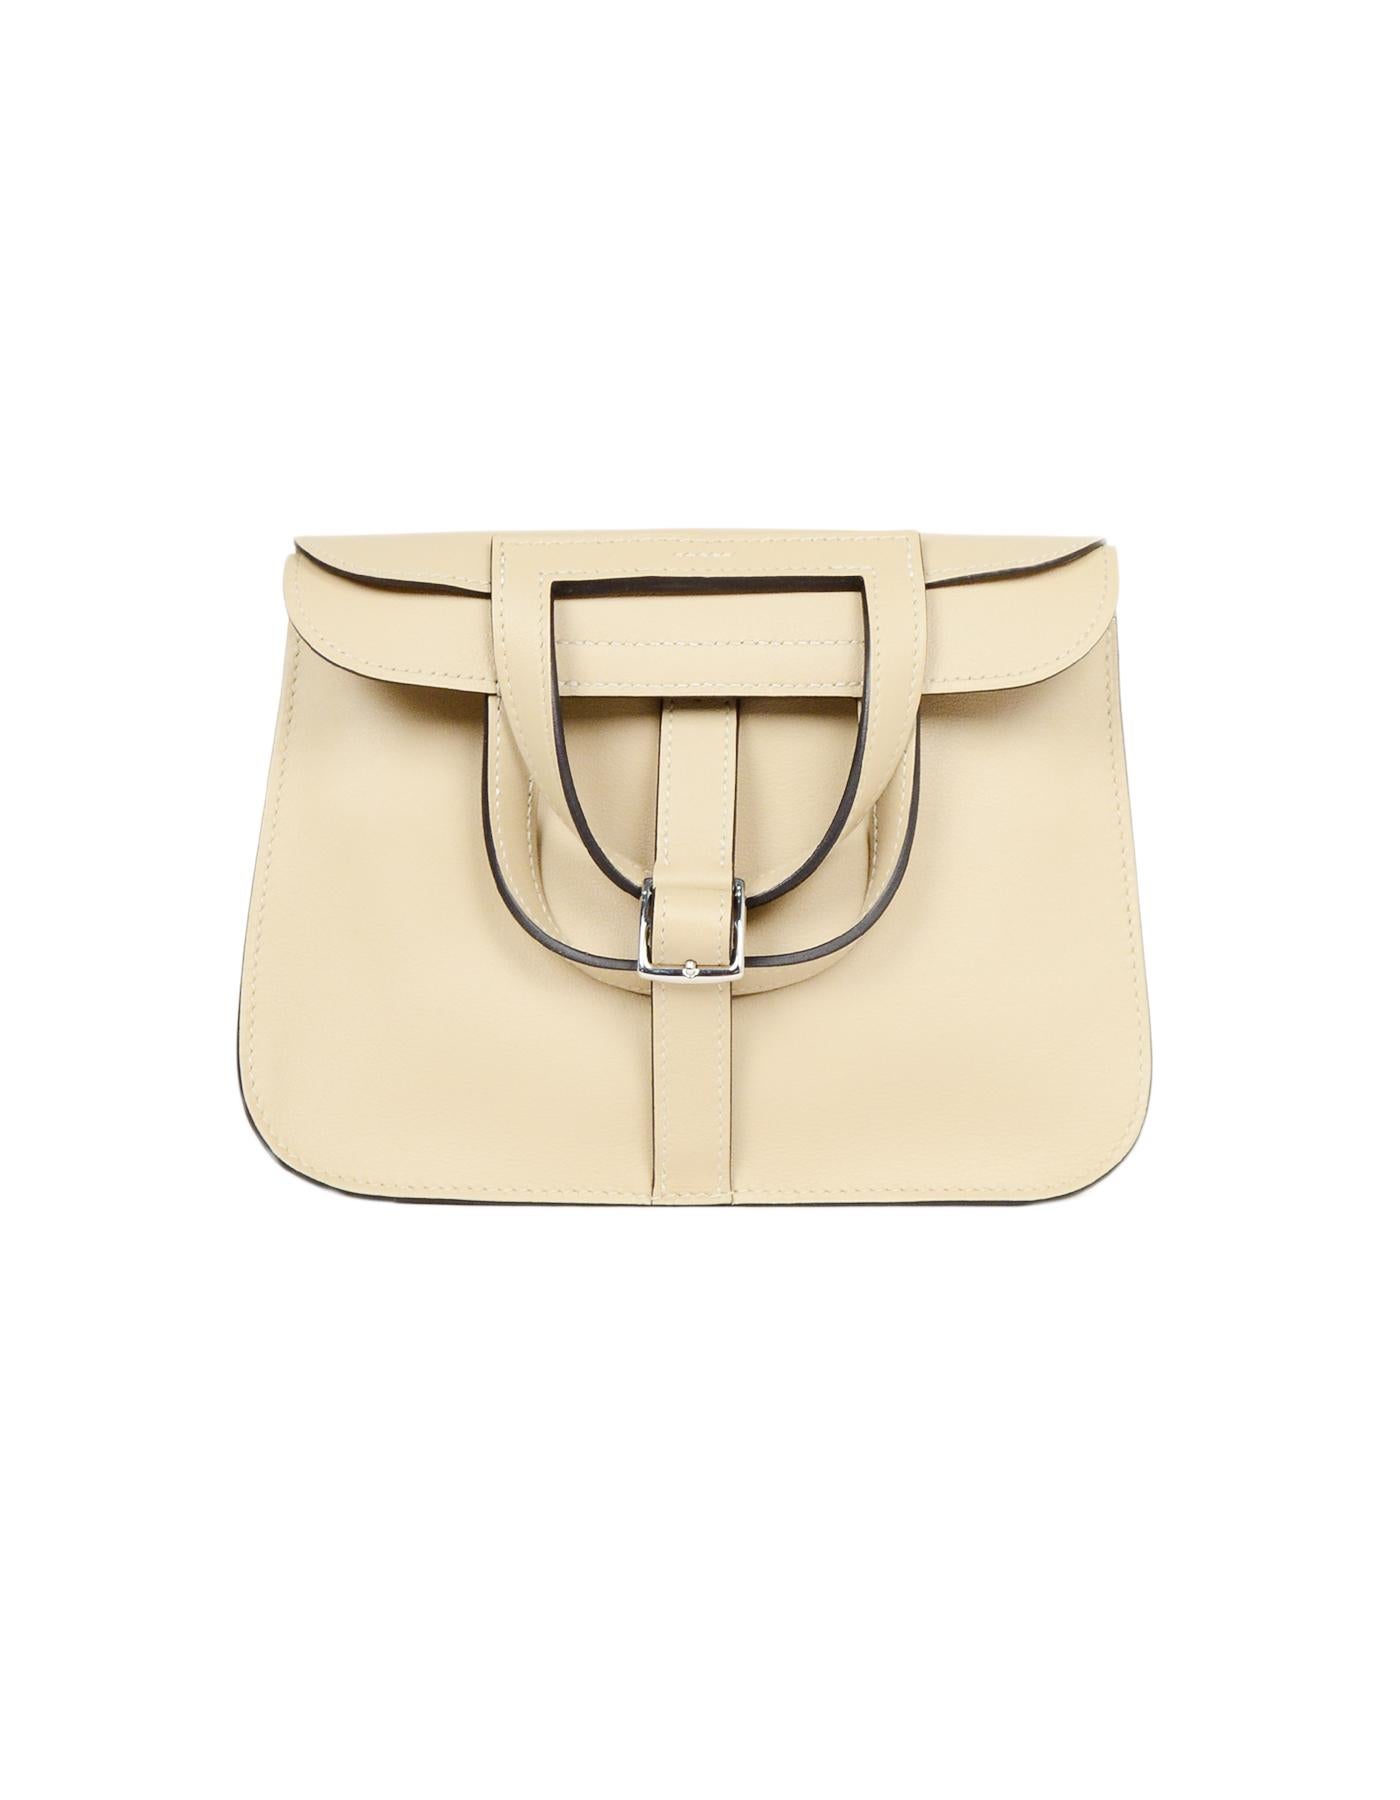 Hermes 2018 Trench Swift Leather Halzan Mini 22 Bag

Made In: France
Year of Production: 2018
Color: Trench (taupe)
Hardware: Palladium 
Materials: Swift leather
Lining: Trench leather
Closure/Opening: Fold over stirrup-shaped handles that can go